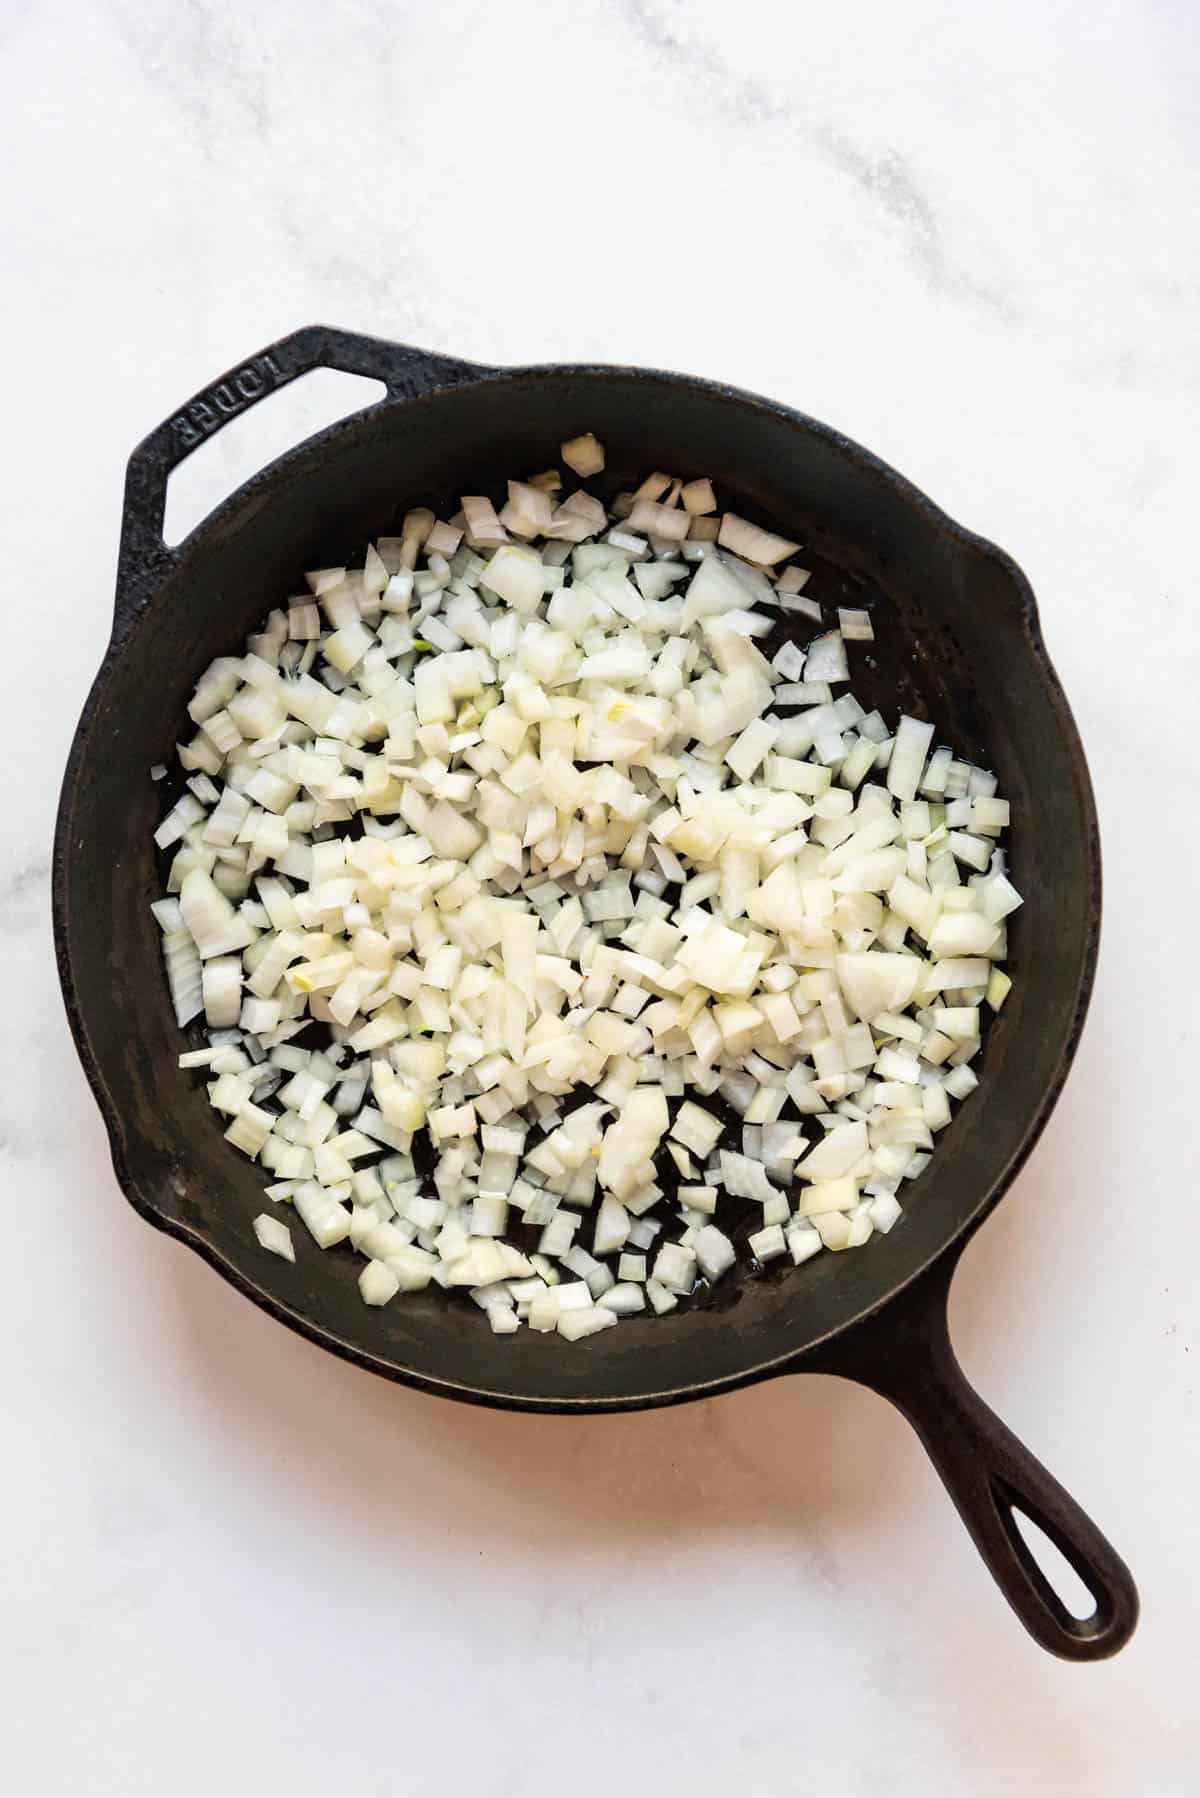 Diced onions in a large cast iron skillet.